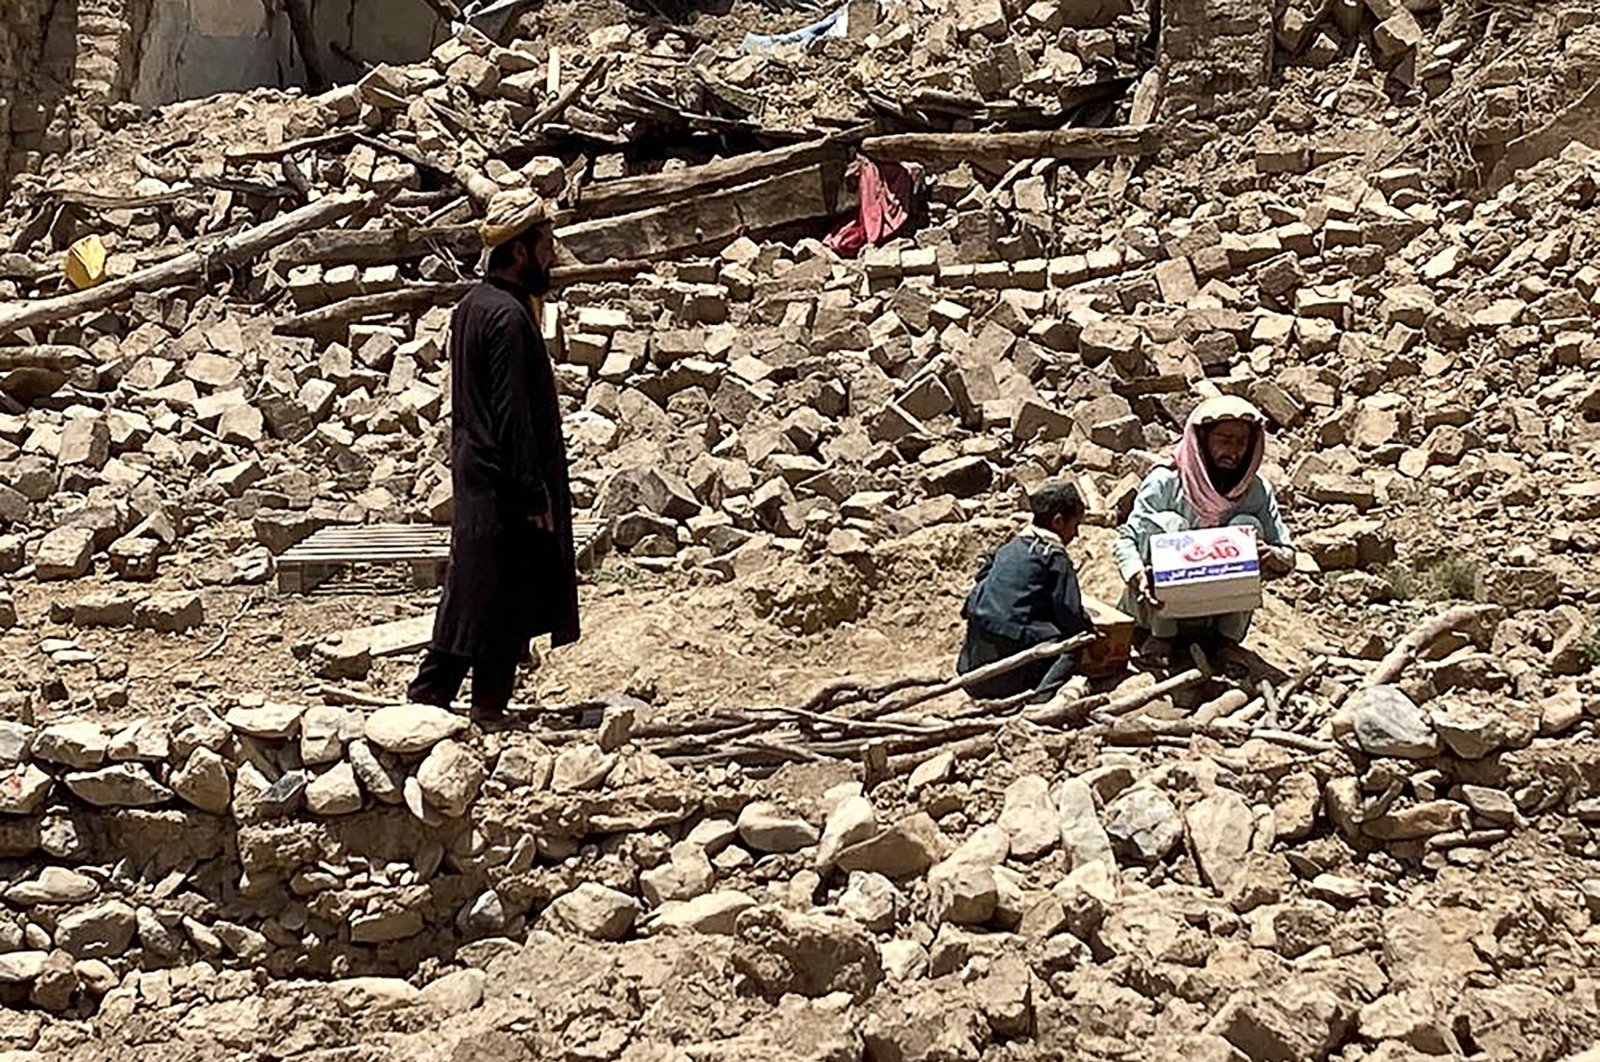 Men stand amid the rubble of damaged houses following an earthquake in Bermal district, in Paktika province, Afghanistan, June 23, 2022. (AP Photo)